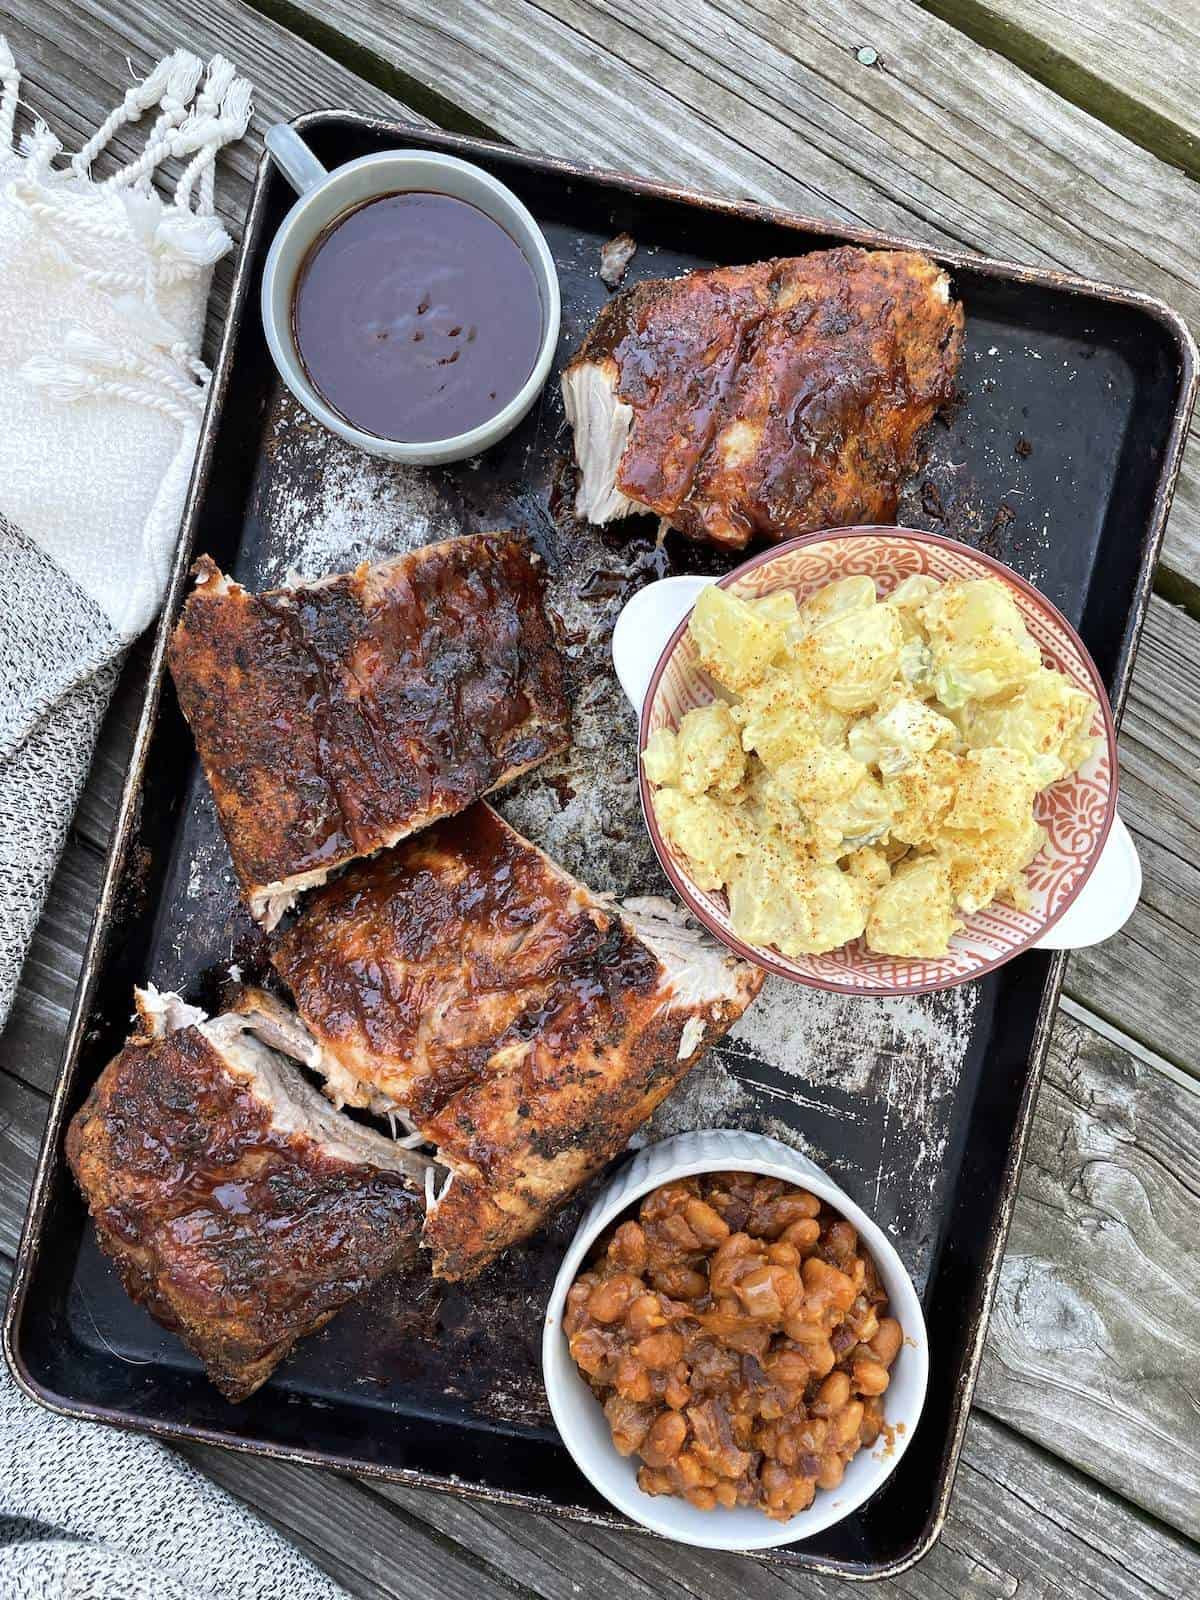 A tray with baked beans from scratch, baby back ribs, and southern potato salad.